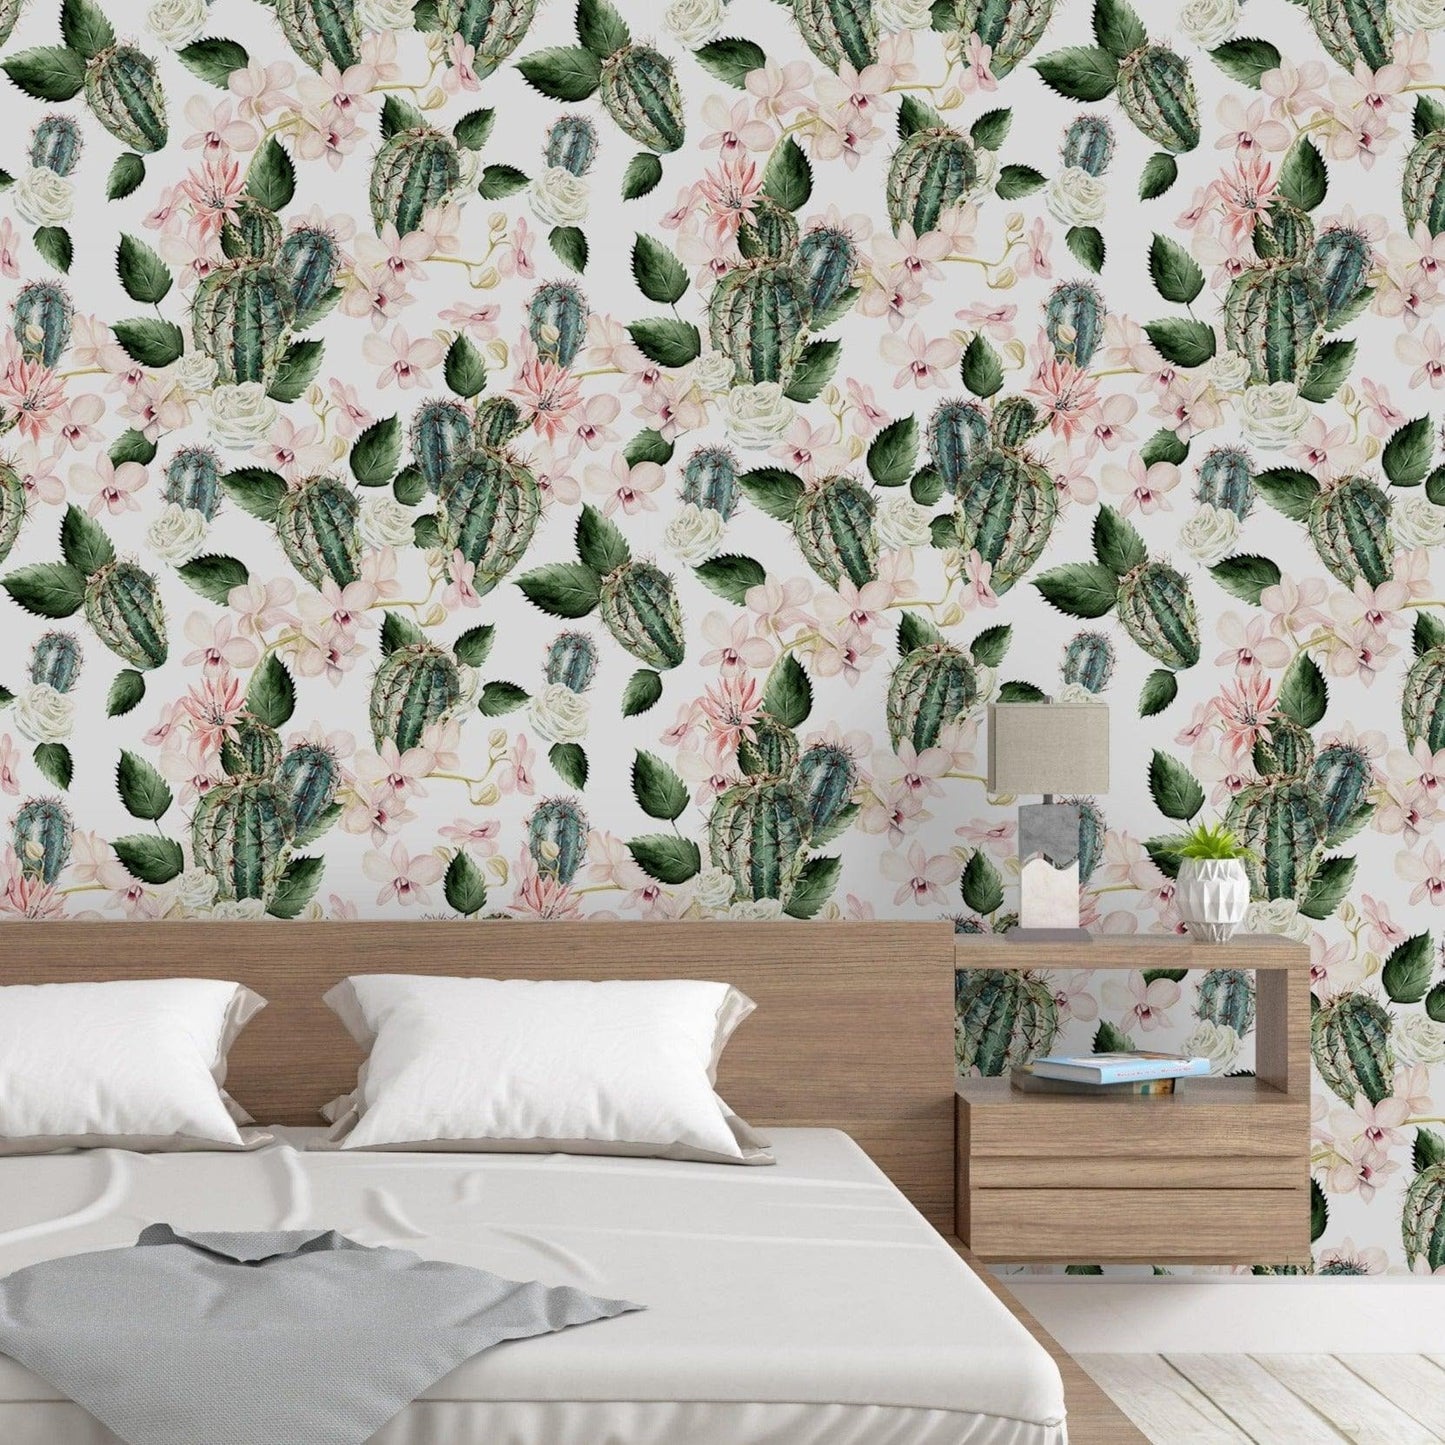 Floral Green Cactus Rose and Orchids Removable Wallpaper Floral Green Cactus Rose and Orchids Removable Wallpaper 